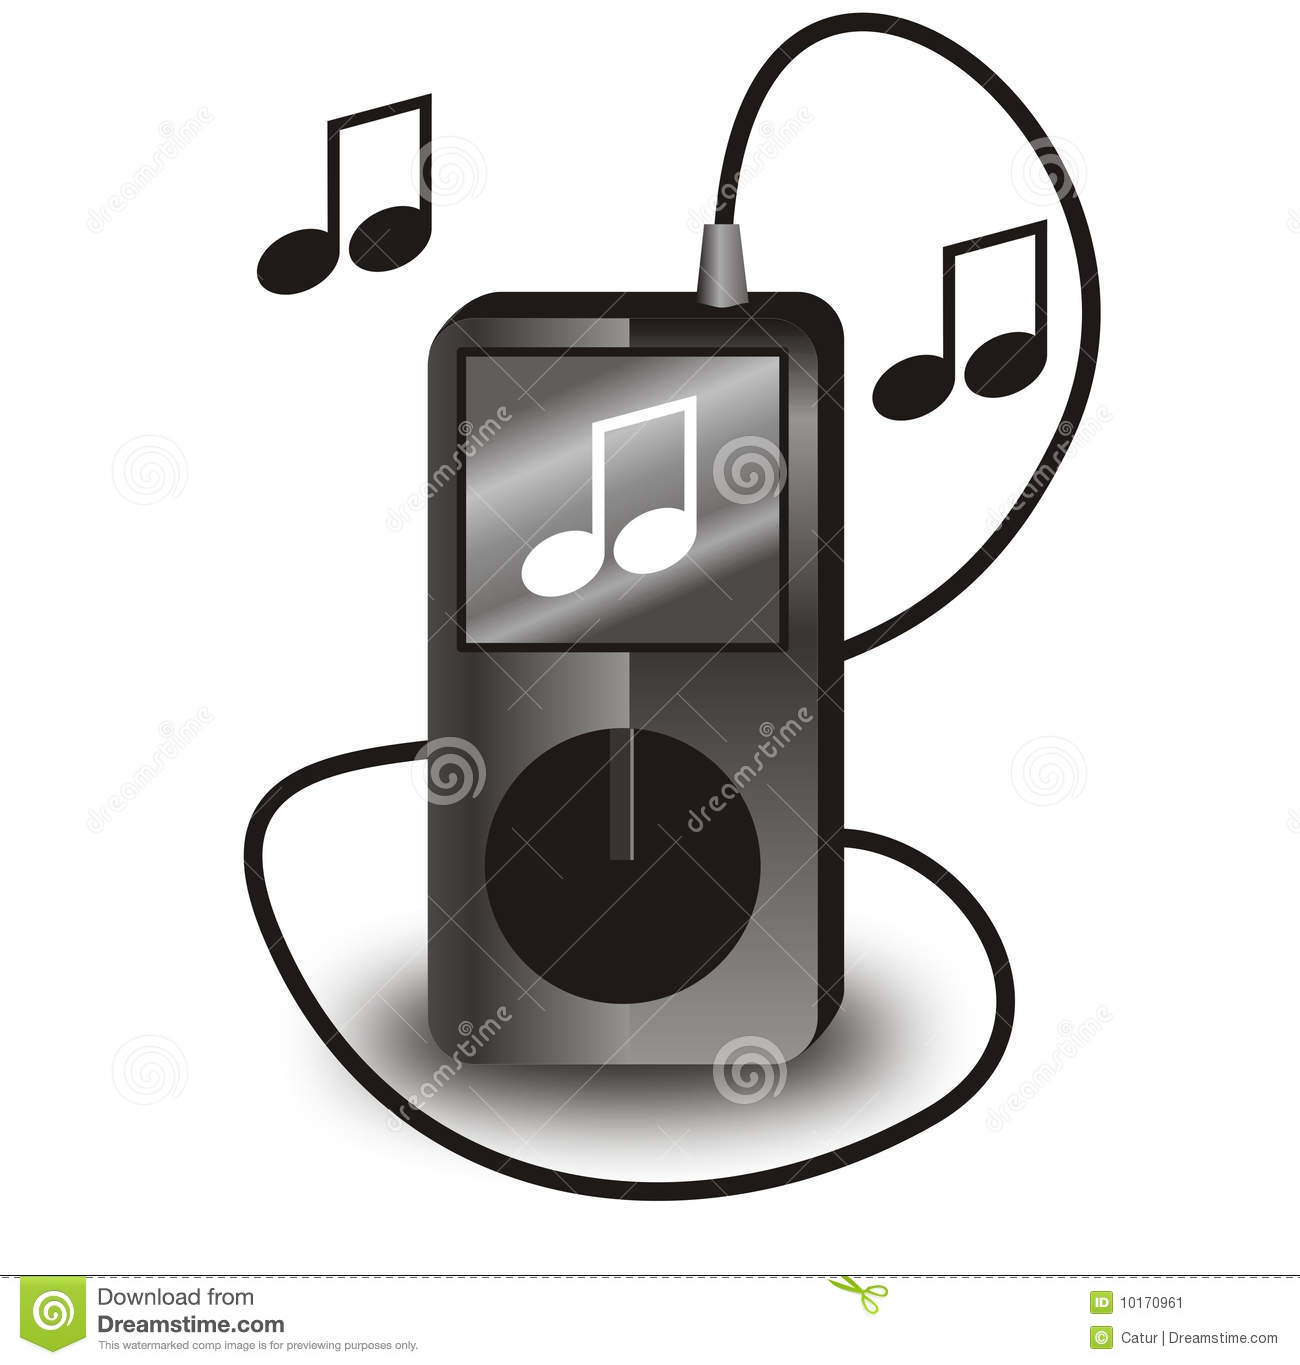 Ipod Icon Clip Art At Clker C